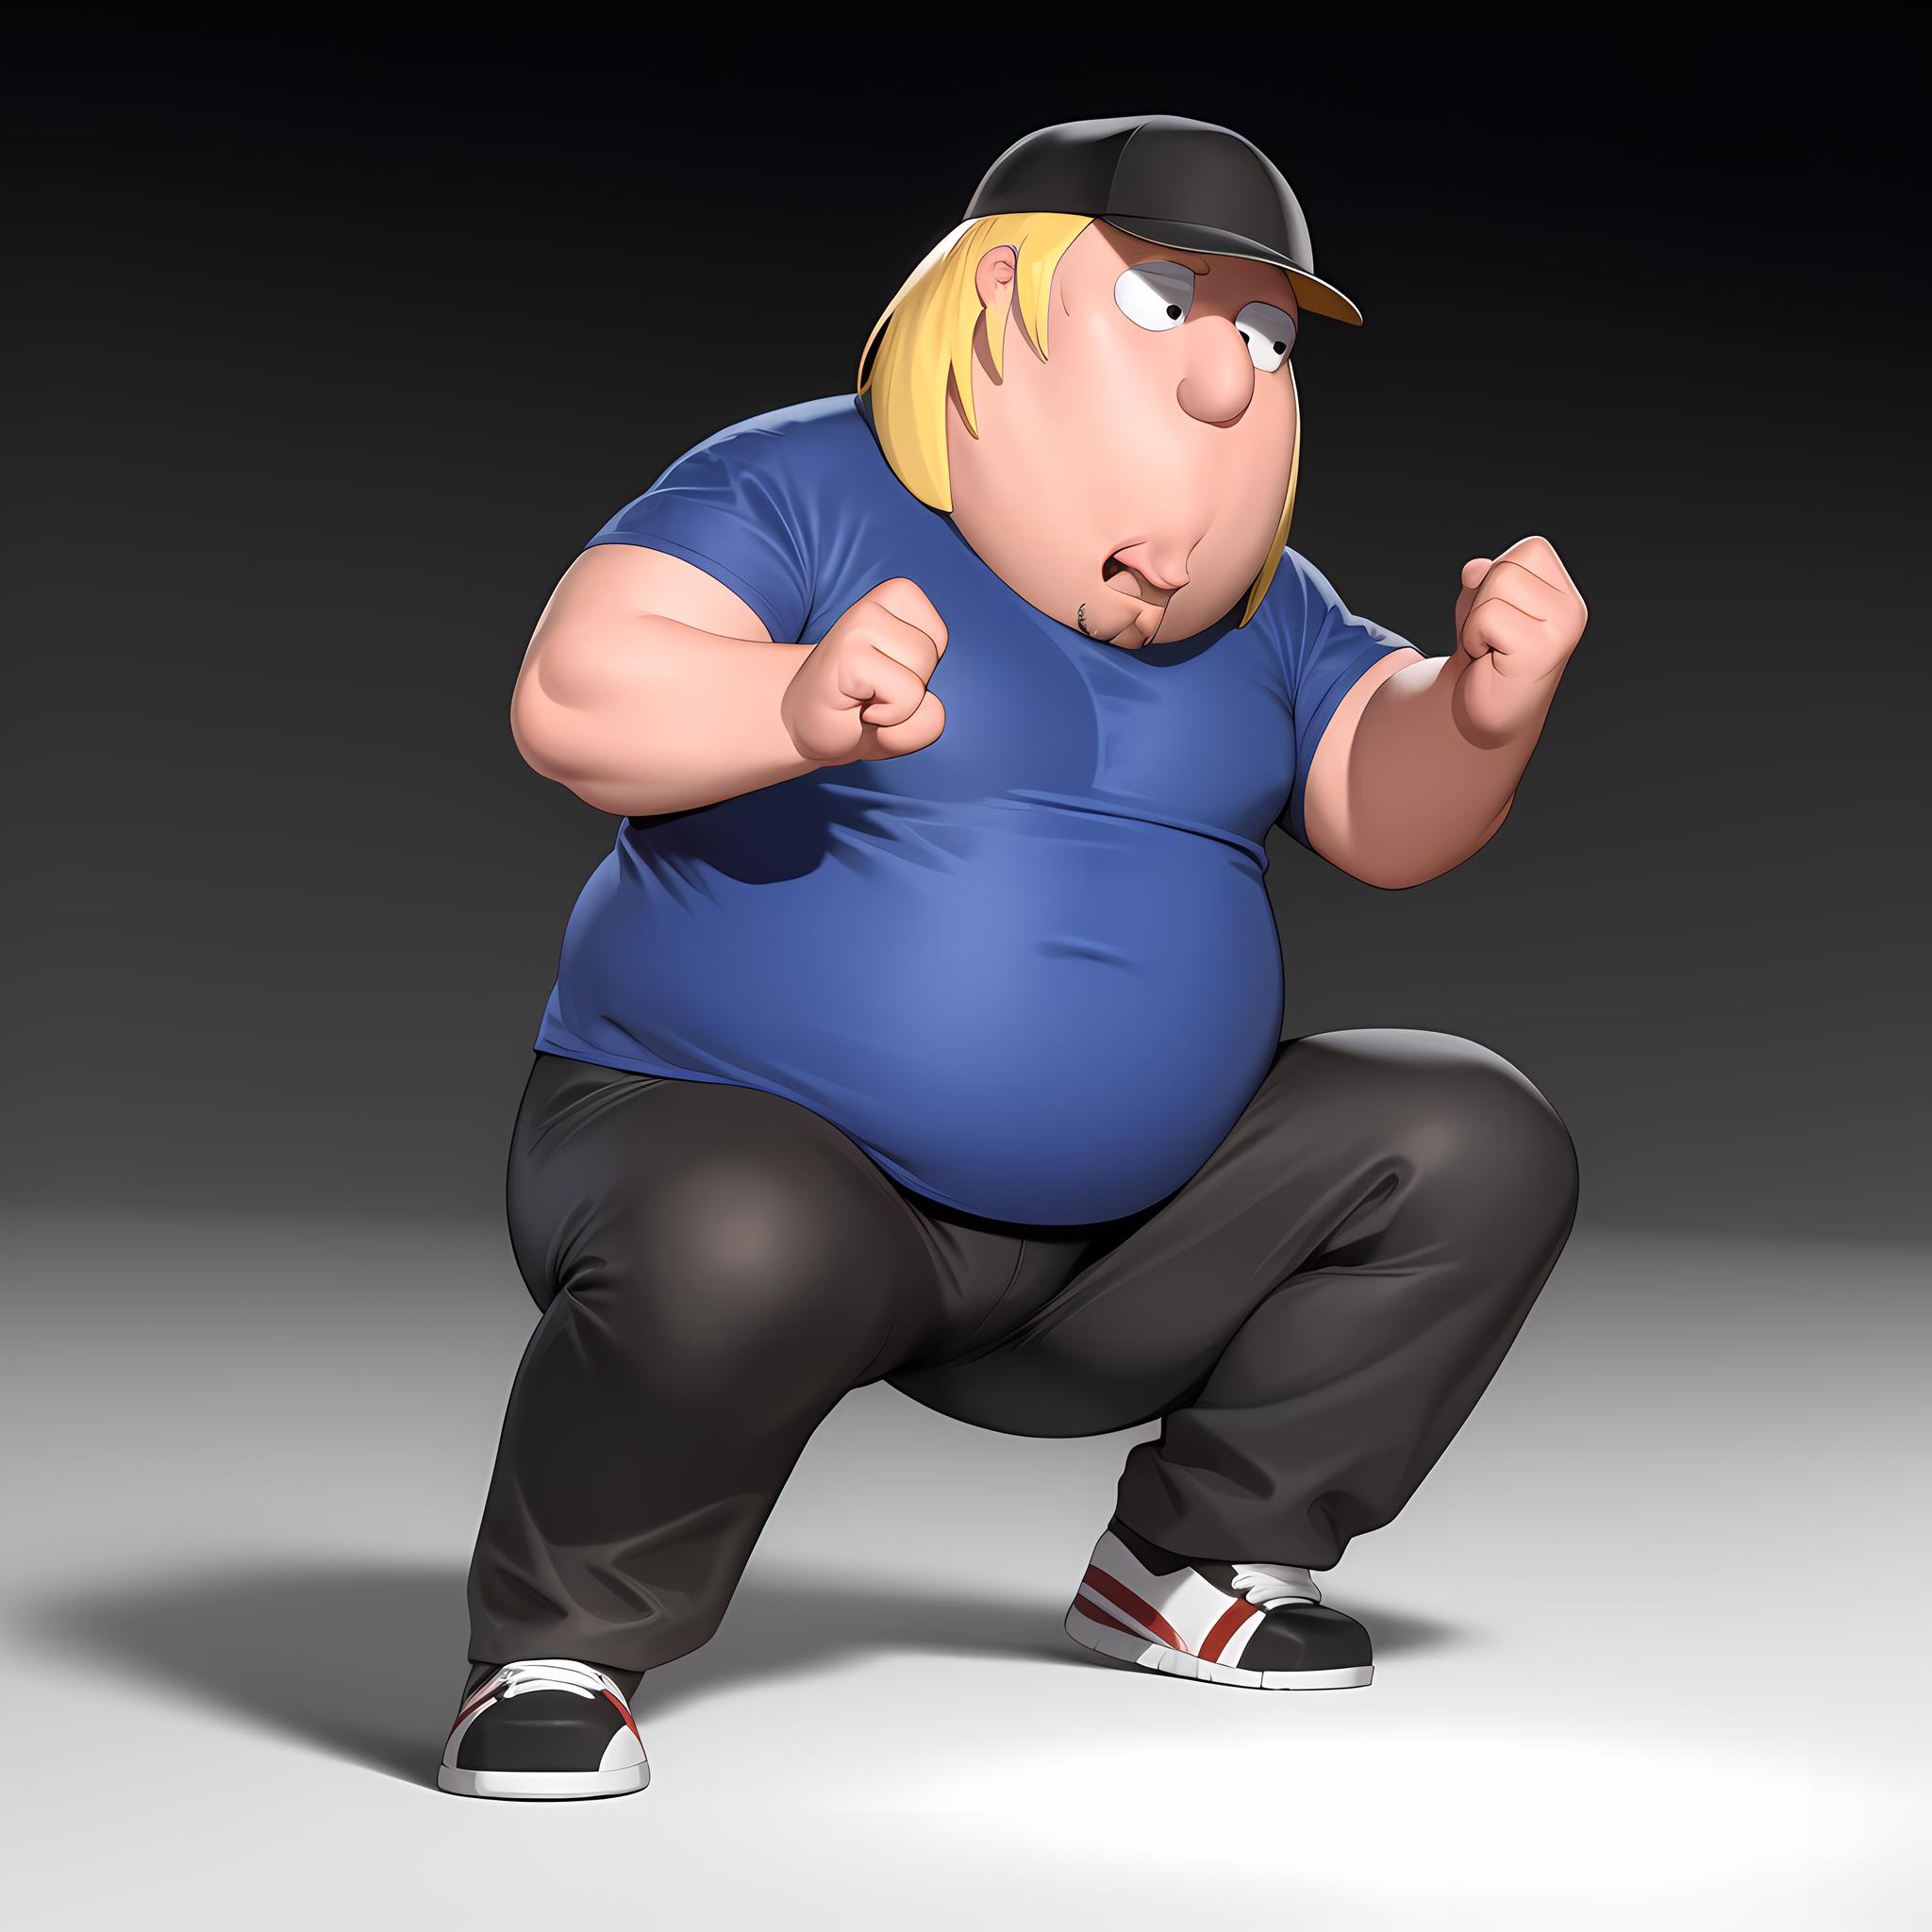 Chris Griffin image by TheGooder